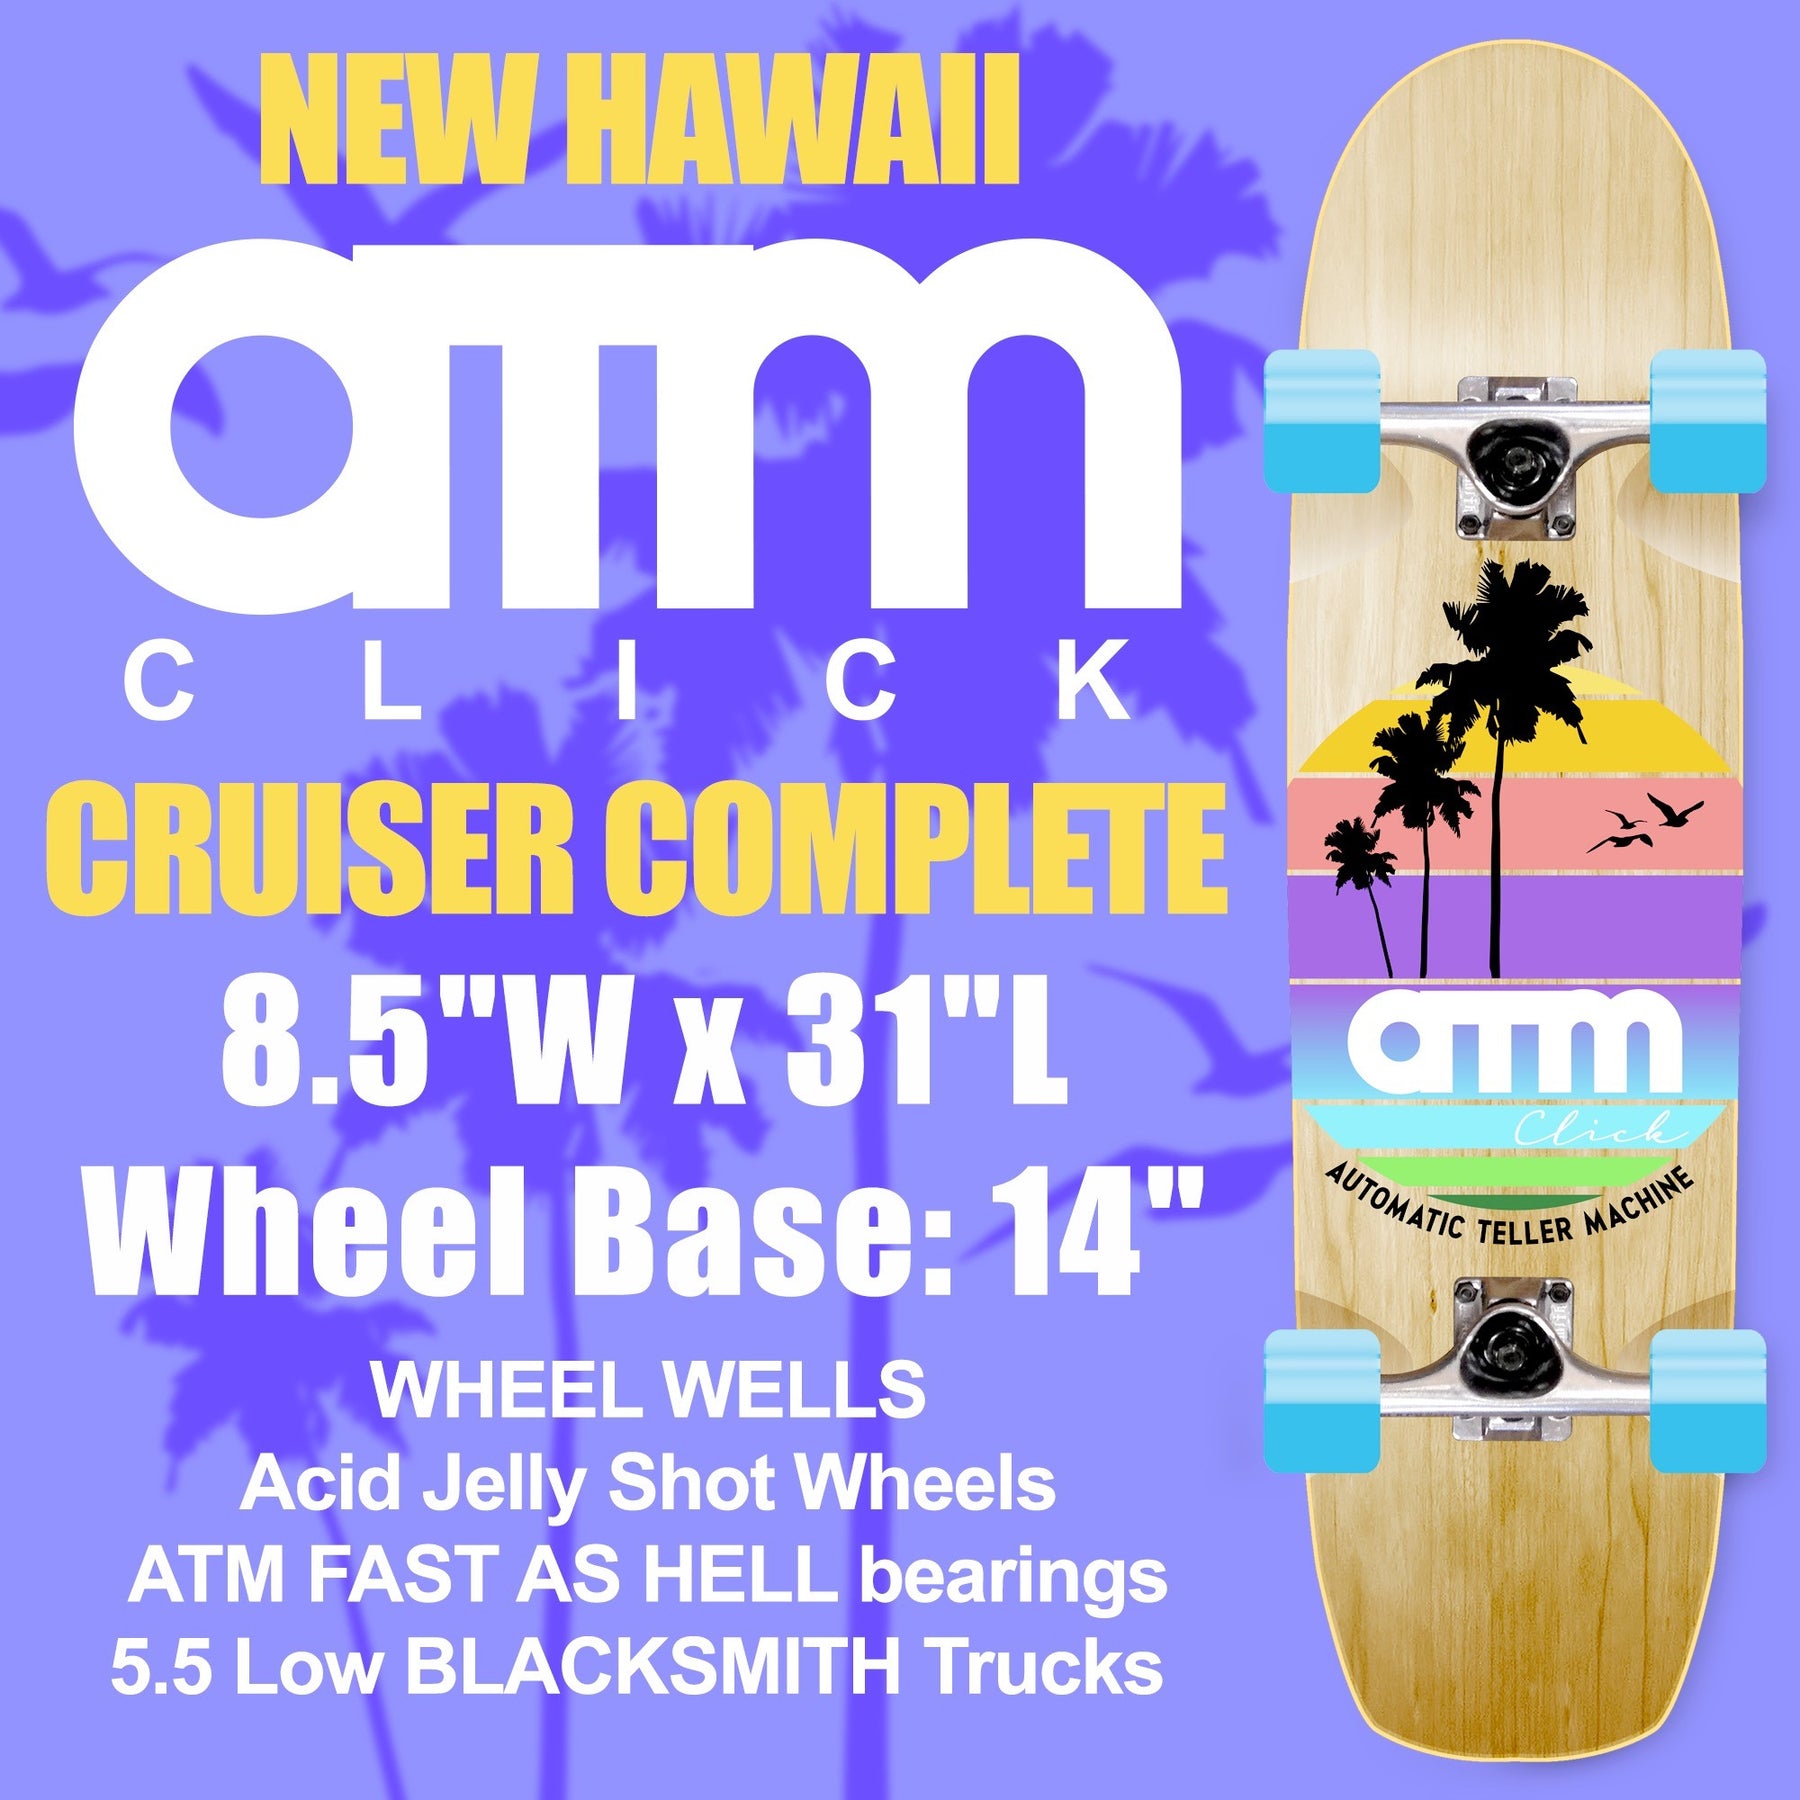 New ATM Click "Hawaii" Cruiser Completes out now!